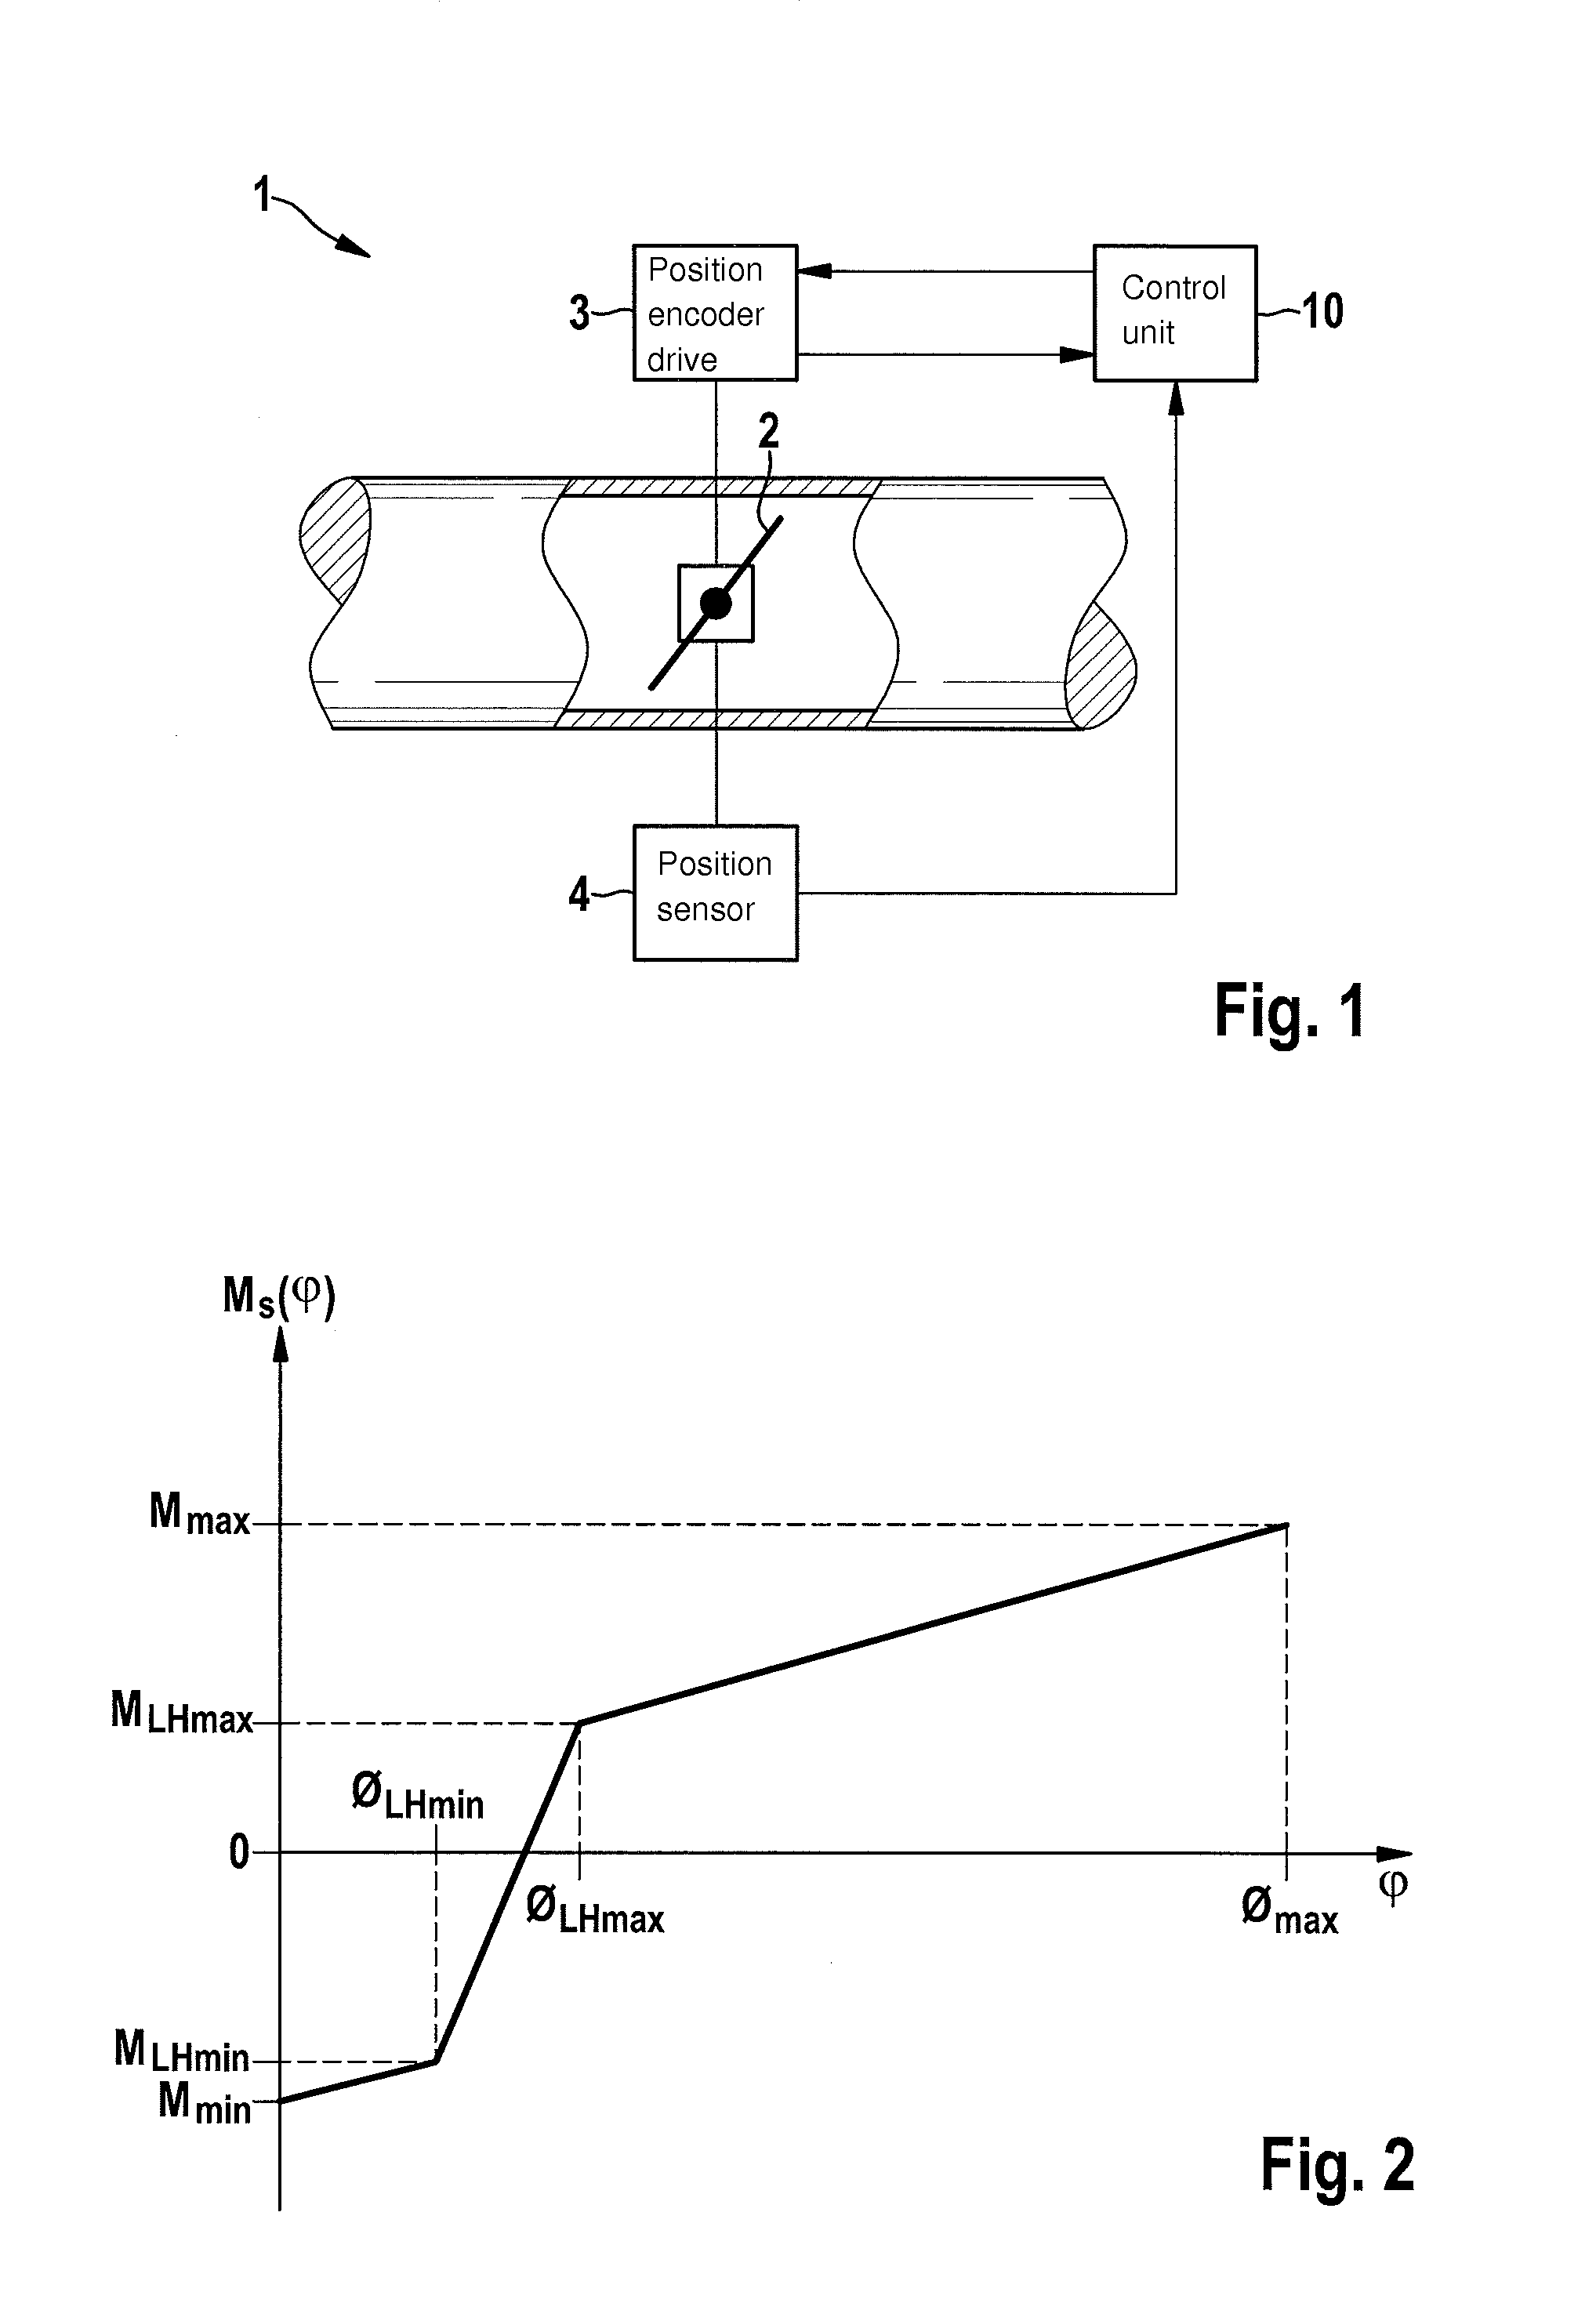 Method and device for creating computational models for nonlinear models of position encoders